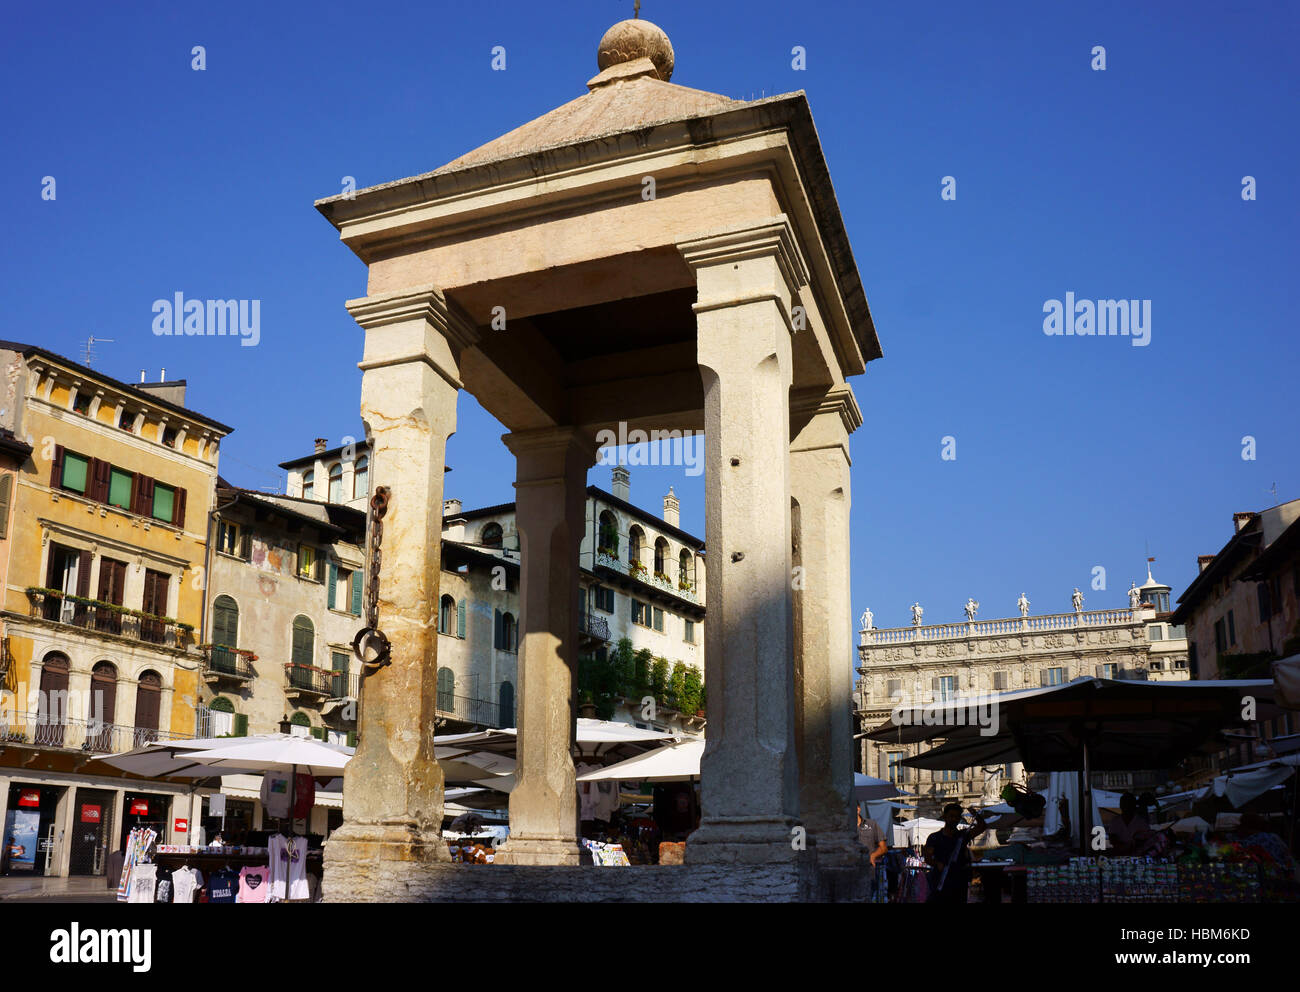 Pillory with chain on Piazza Erbe, Verona, Italy Stock Photo